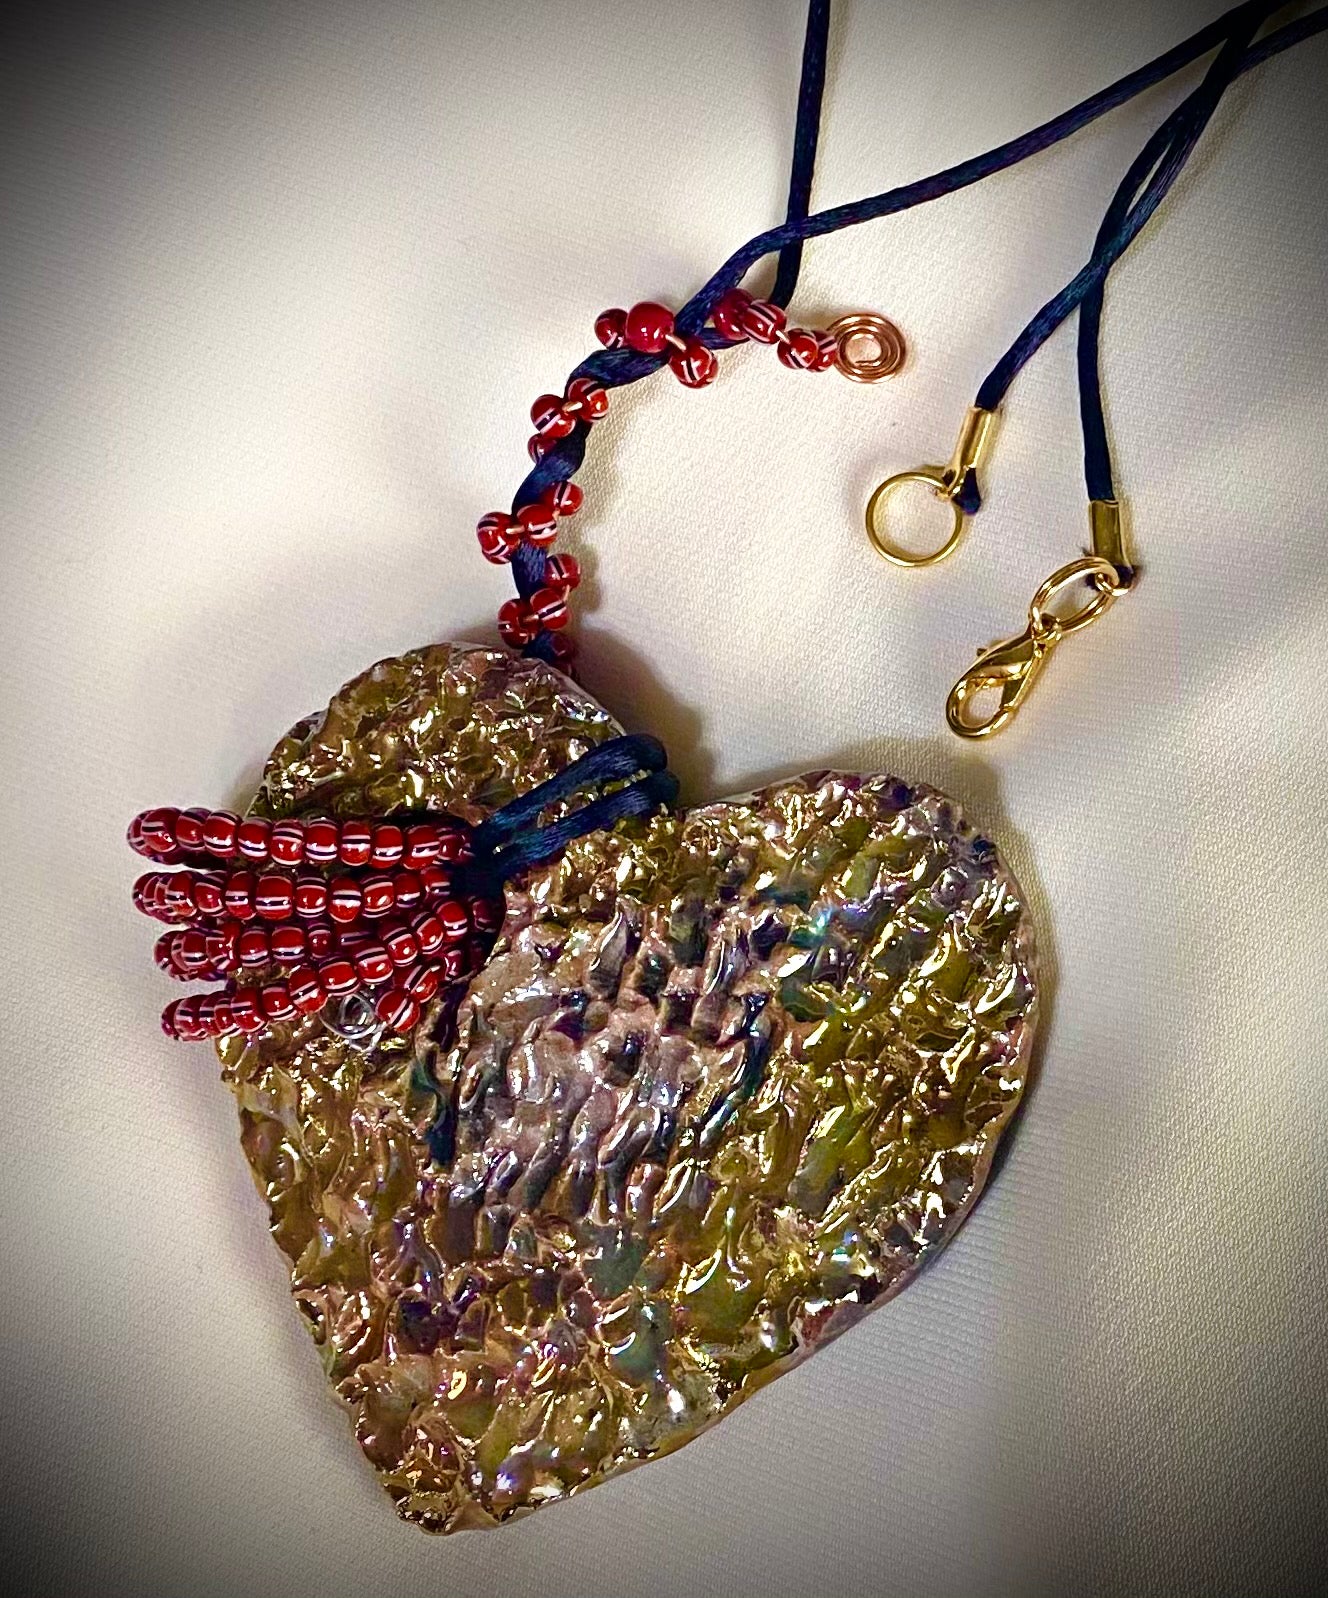  Have A Heart ! Each heart pendant is handmade with love! It is 3"x 3" and weighs approx. 3ozs. This pendant has a white and gold metallic raku glazes that renders a unique translucent  patina. The heart has a textured with cut out cross pattern . It holds a spiral of multicolored mini beads on a spiral copper wire. This pendant has a nice 12" black suede cord!